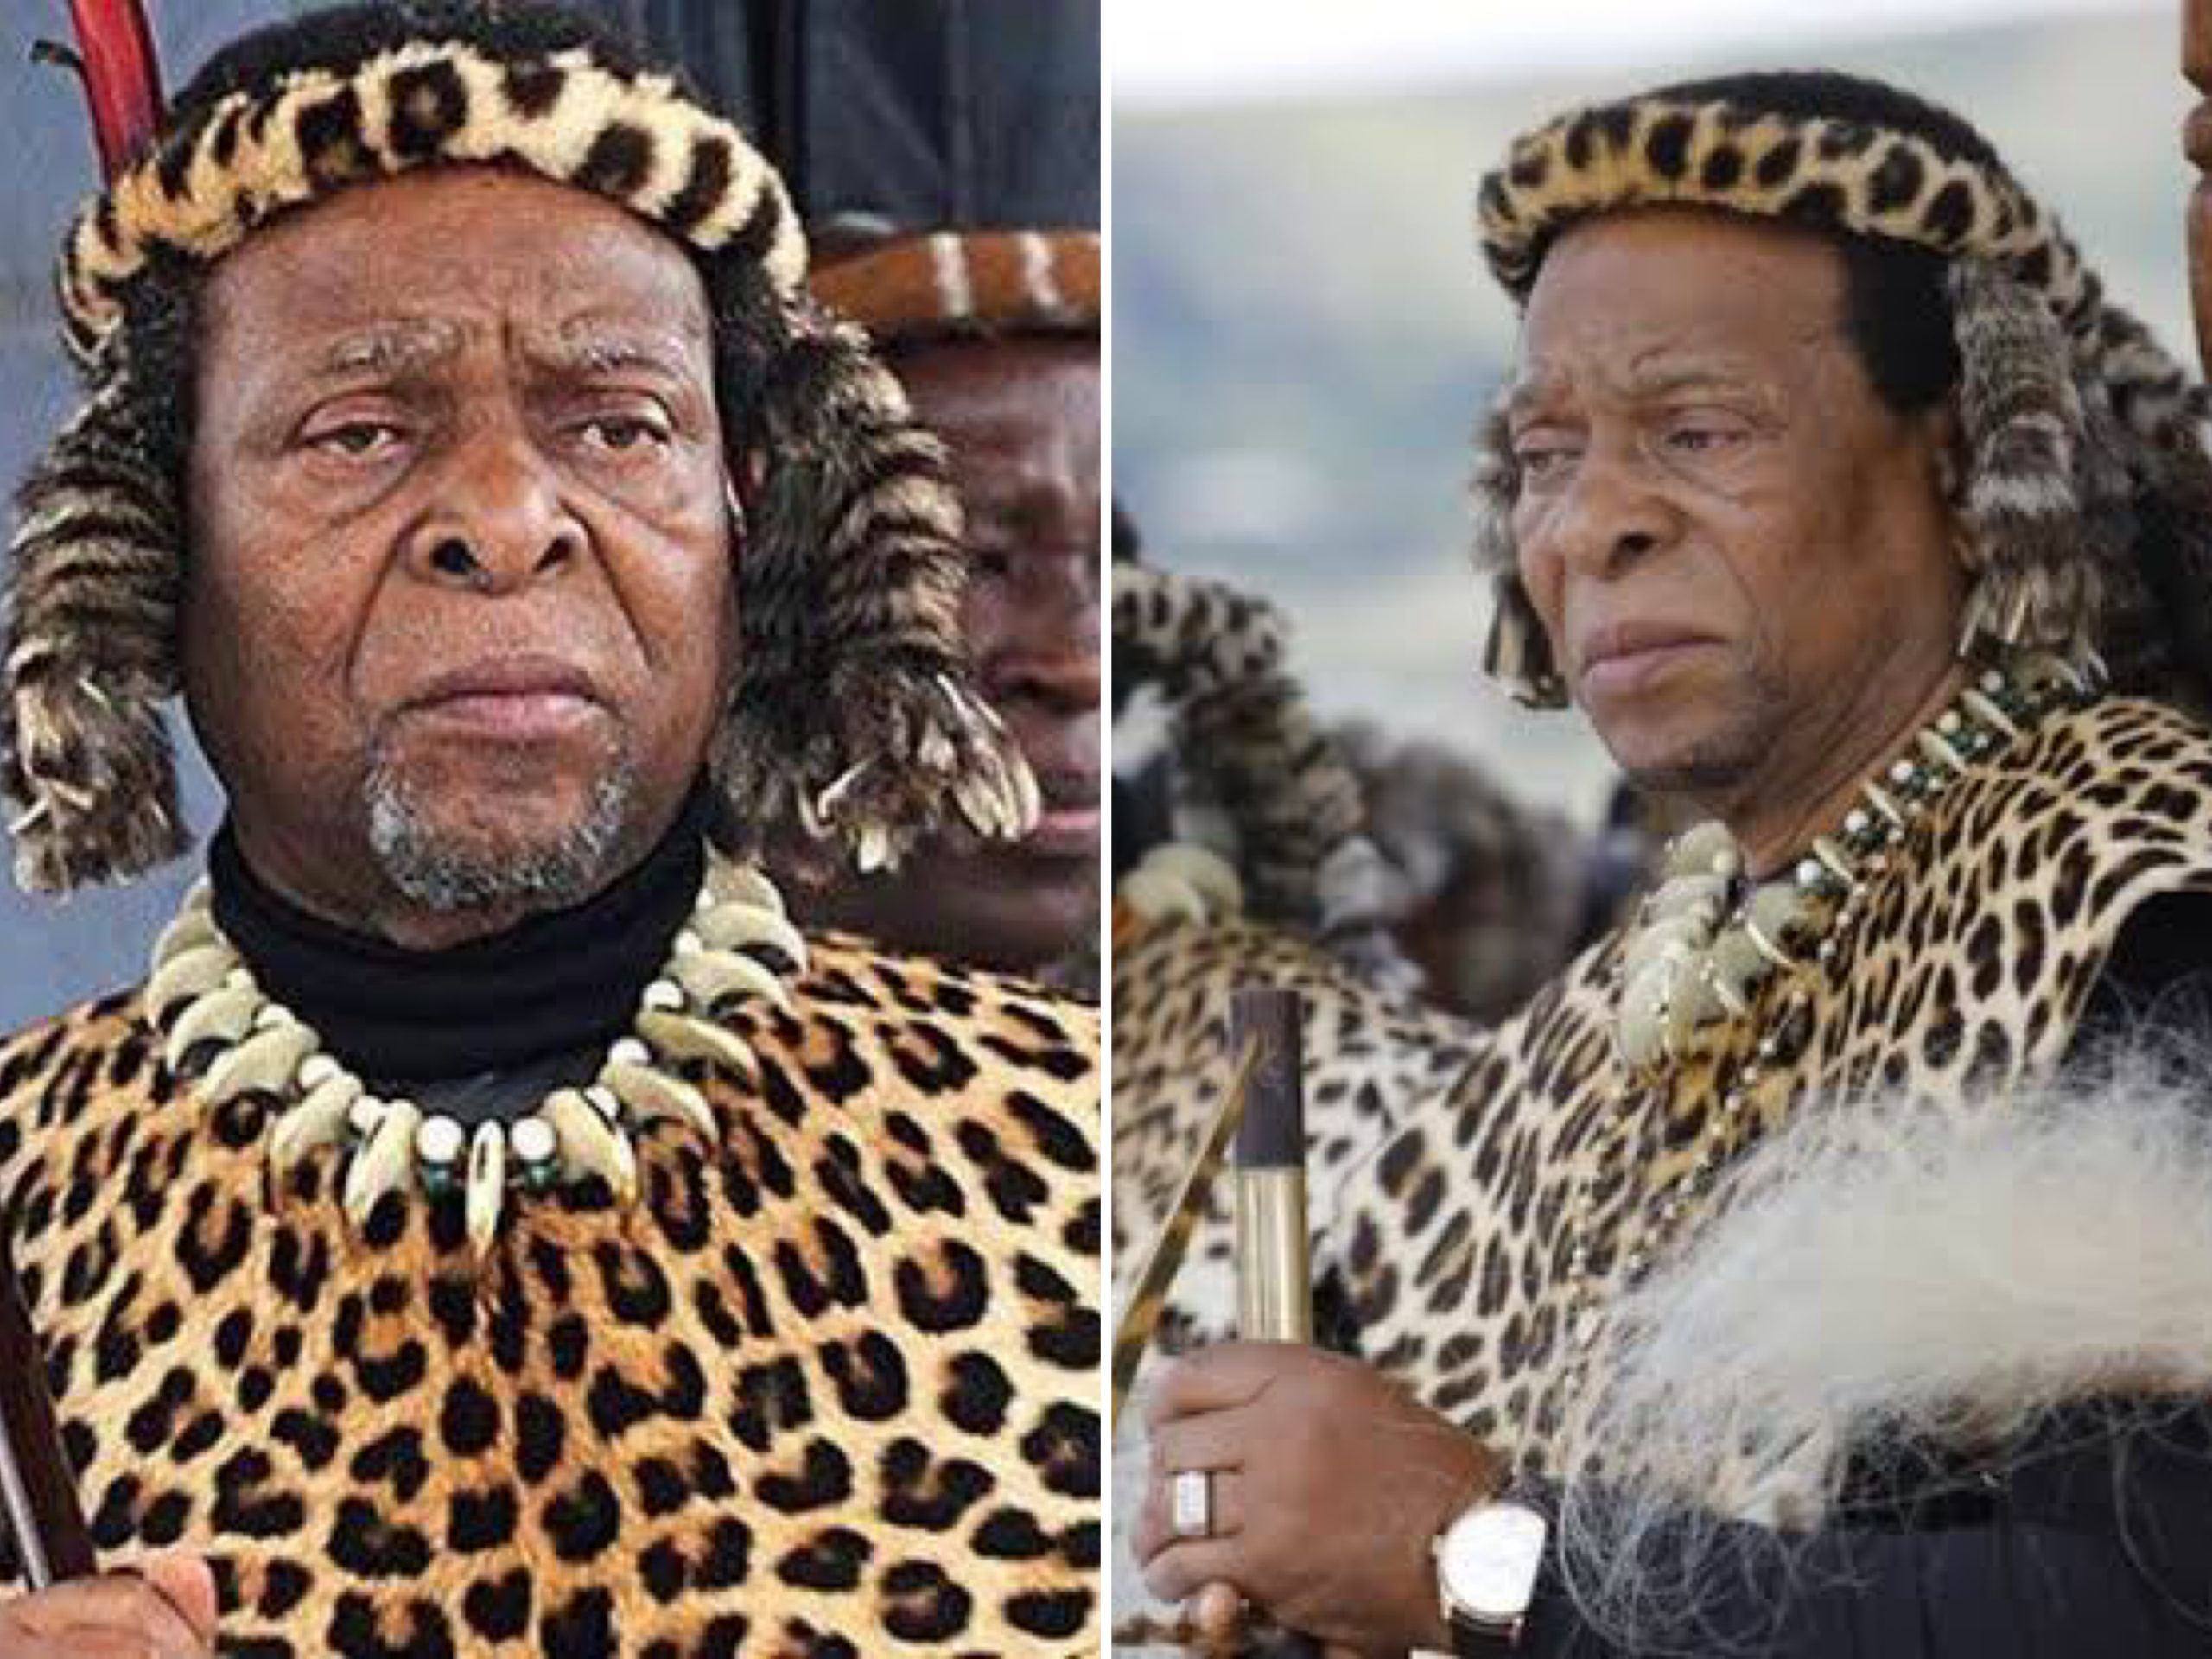 South Africa’s Zulu King, Goodwill Zwelithini Dies At 72